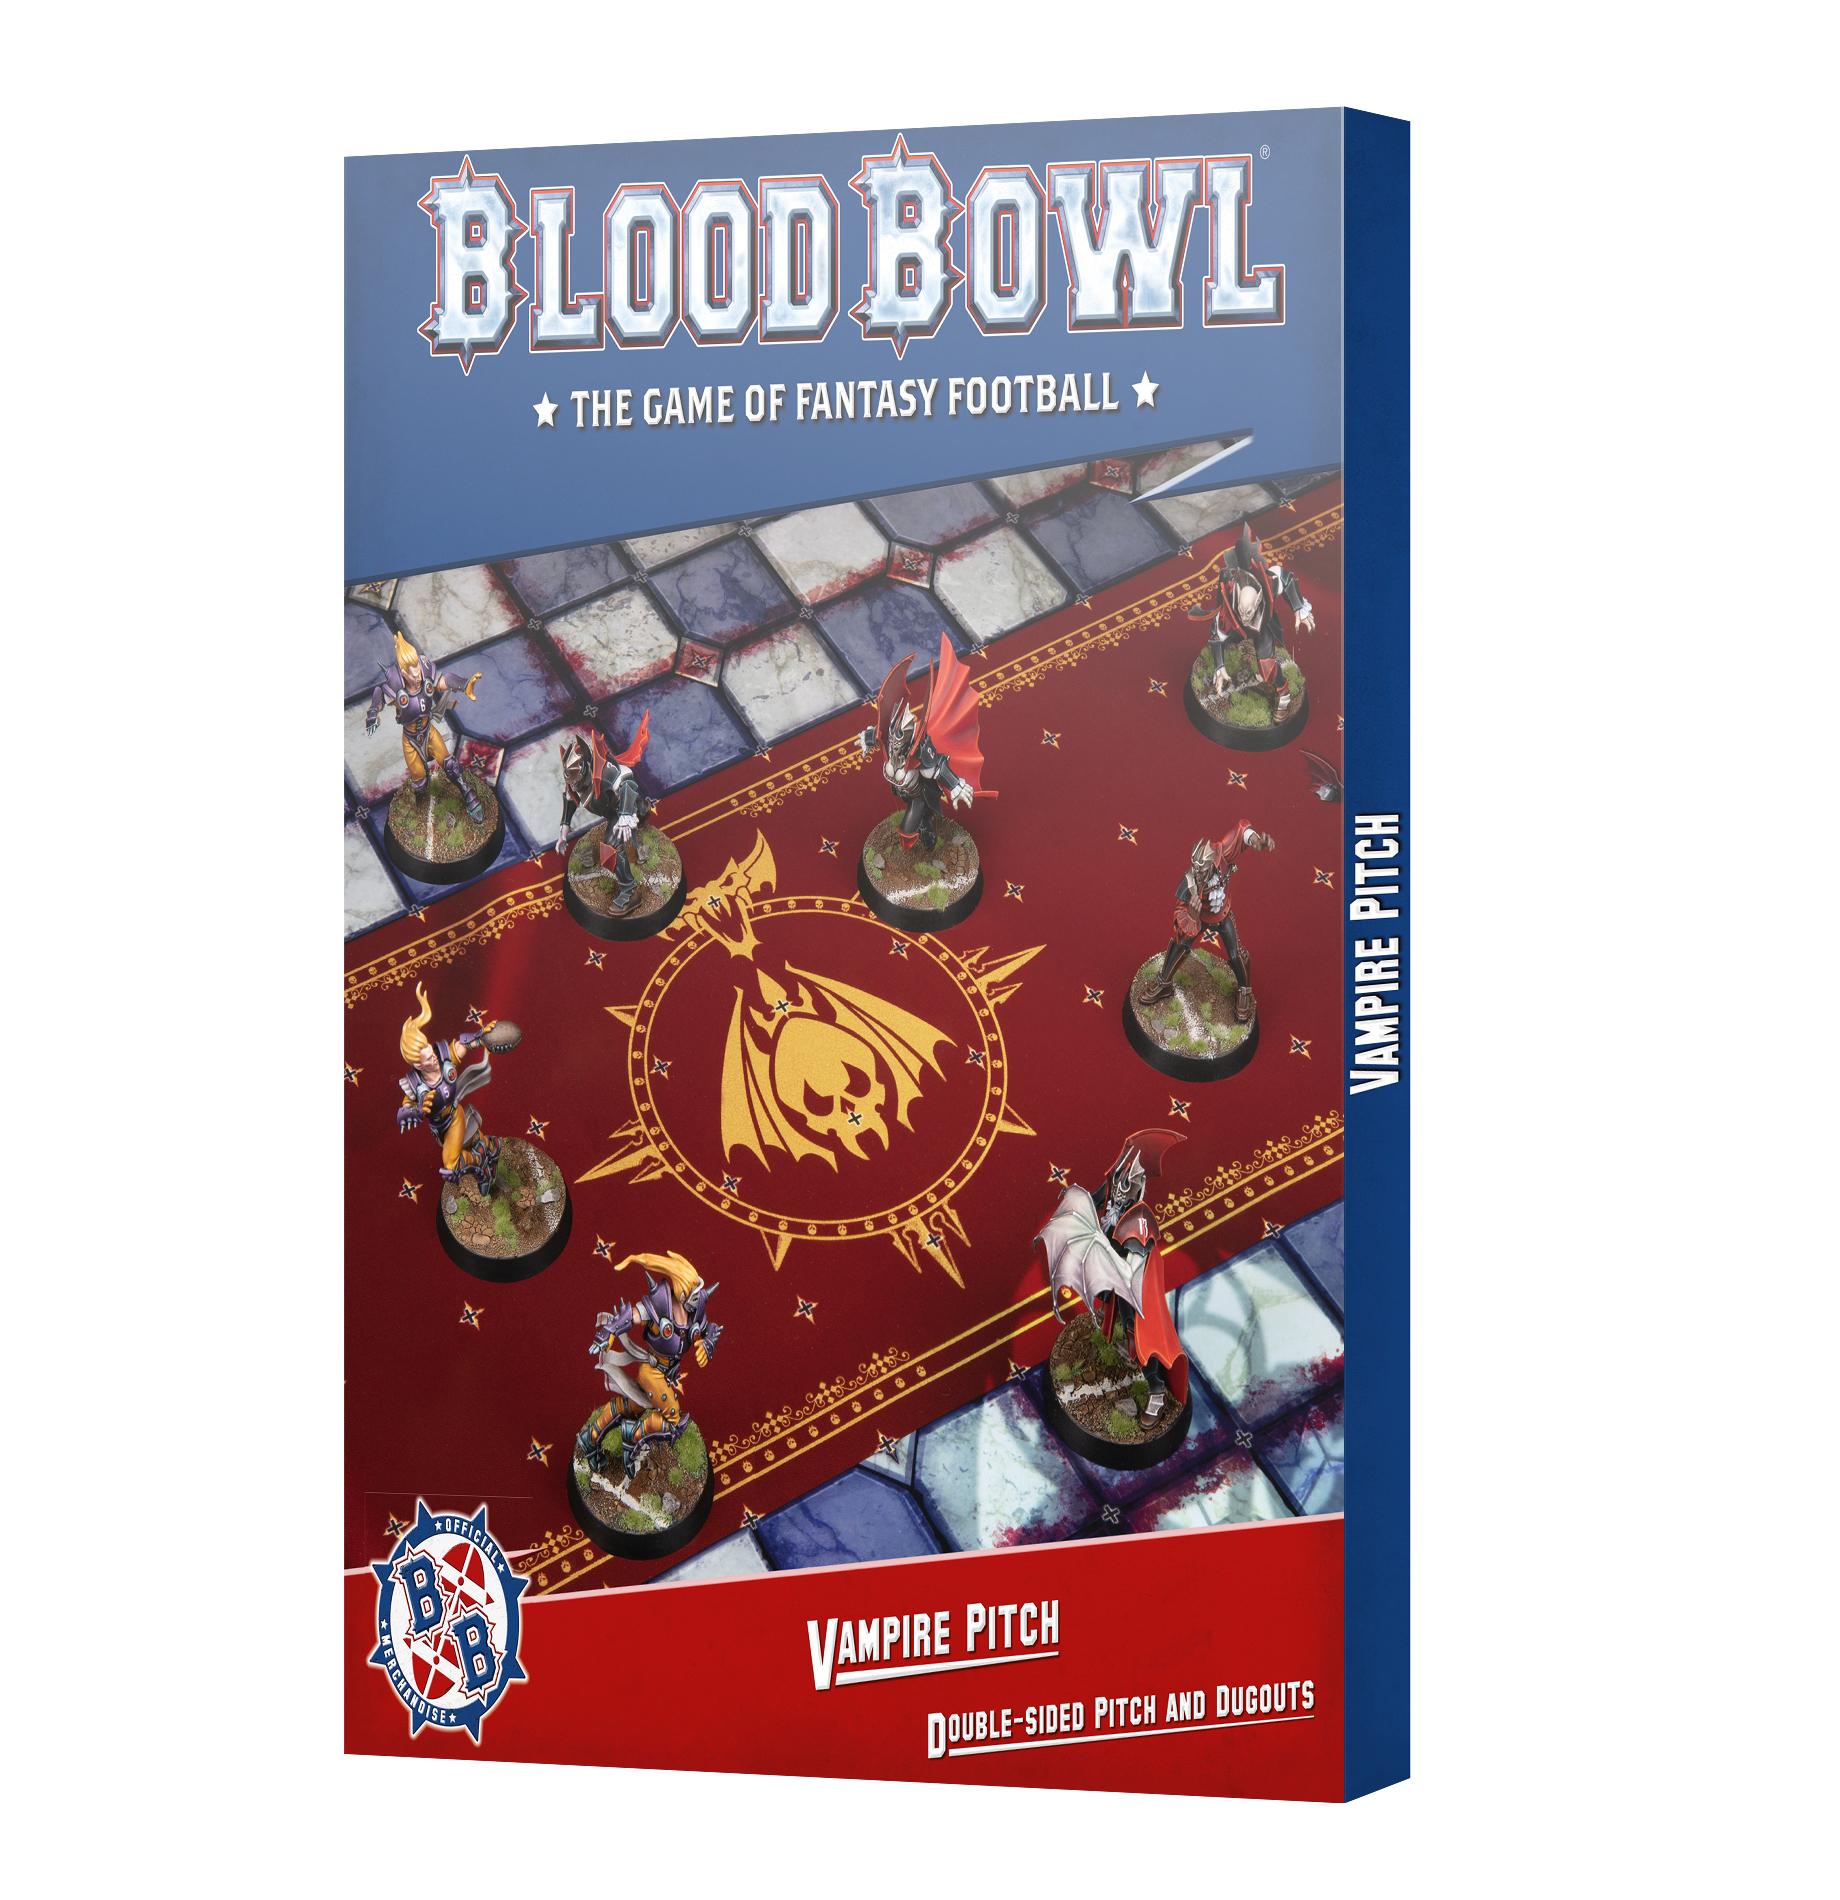 Blood Bowl - Double-sided Pitch and Dugouts: Vampire Pitch